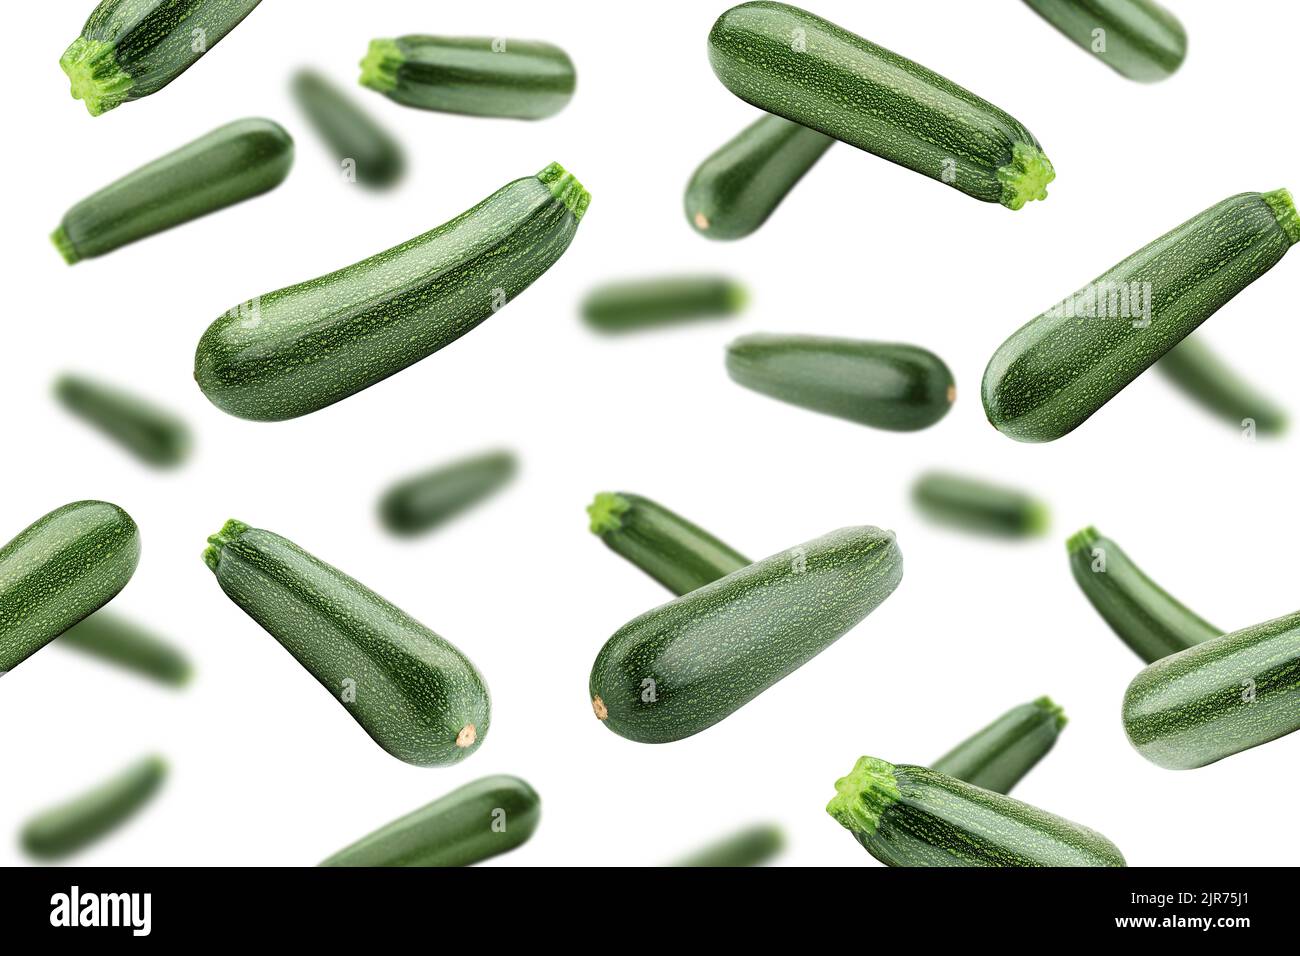 Falling zucchini isolated on white background, selective focus Stock Photo